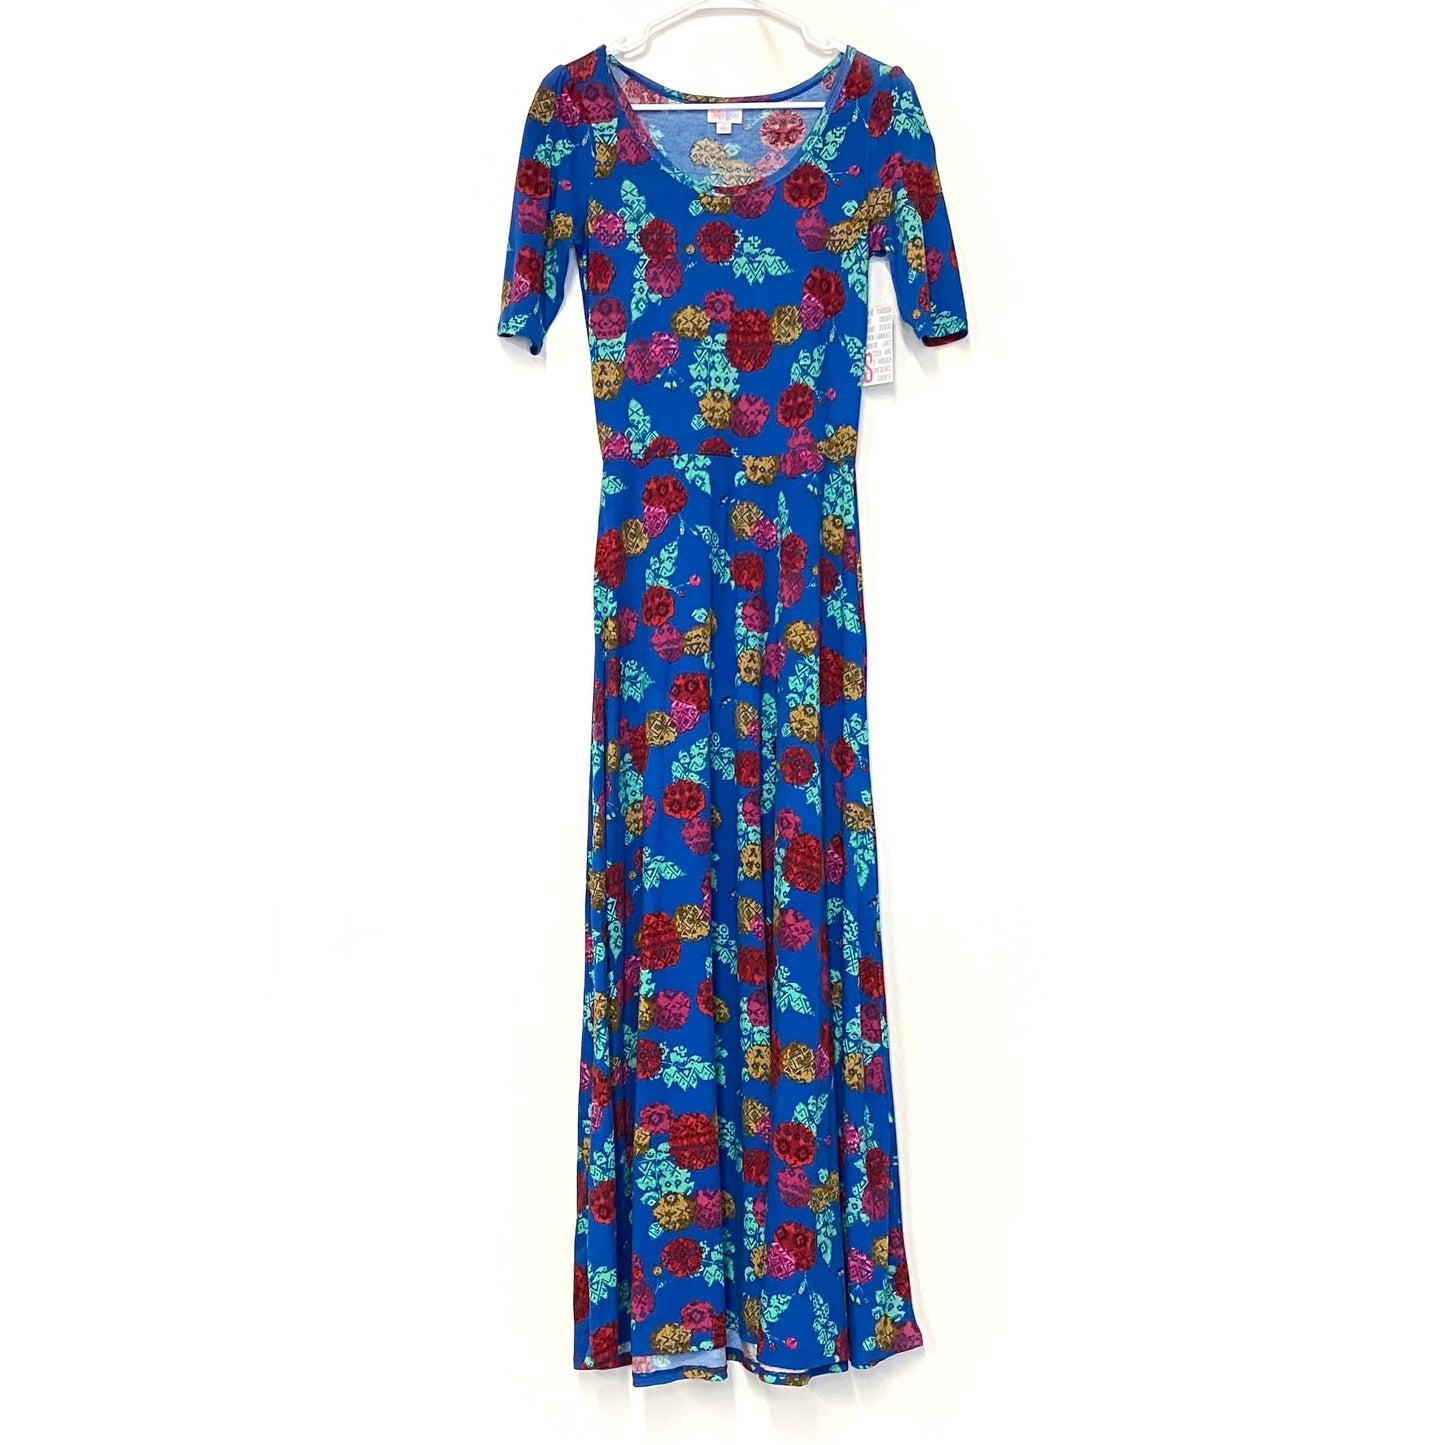 LuLaRoe Womens S Green/Red/Blue Ana Floral Maxi Dress S/s NWT